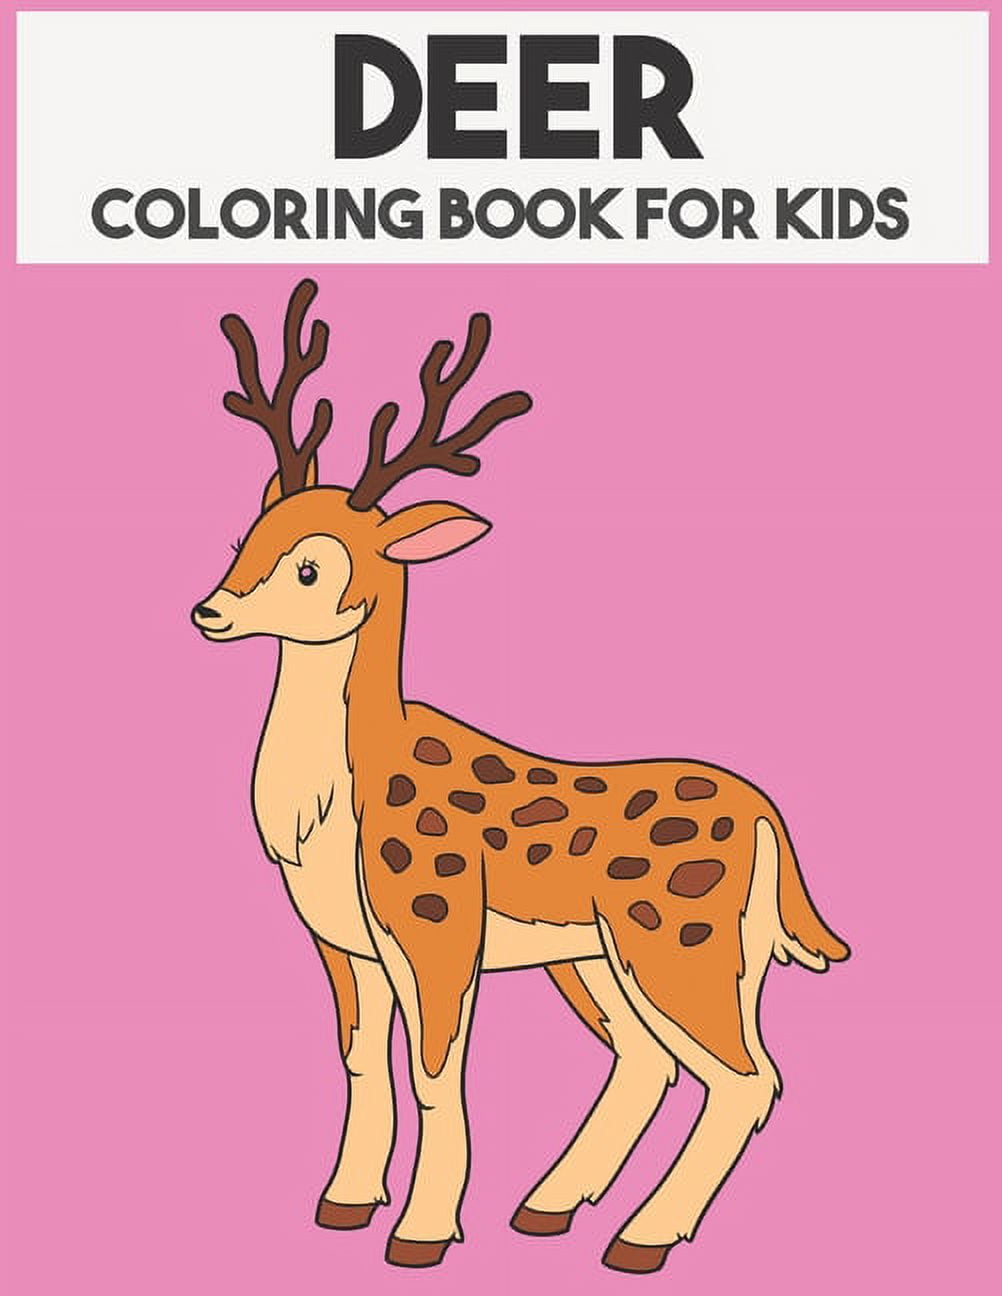 Winter Animals coloring book for kids ages 4-6: winter book for kids nature coloring  pages of animals lover. perfect gift for ages 3-7 (Paperback), Napa  Bookmine